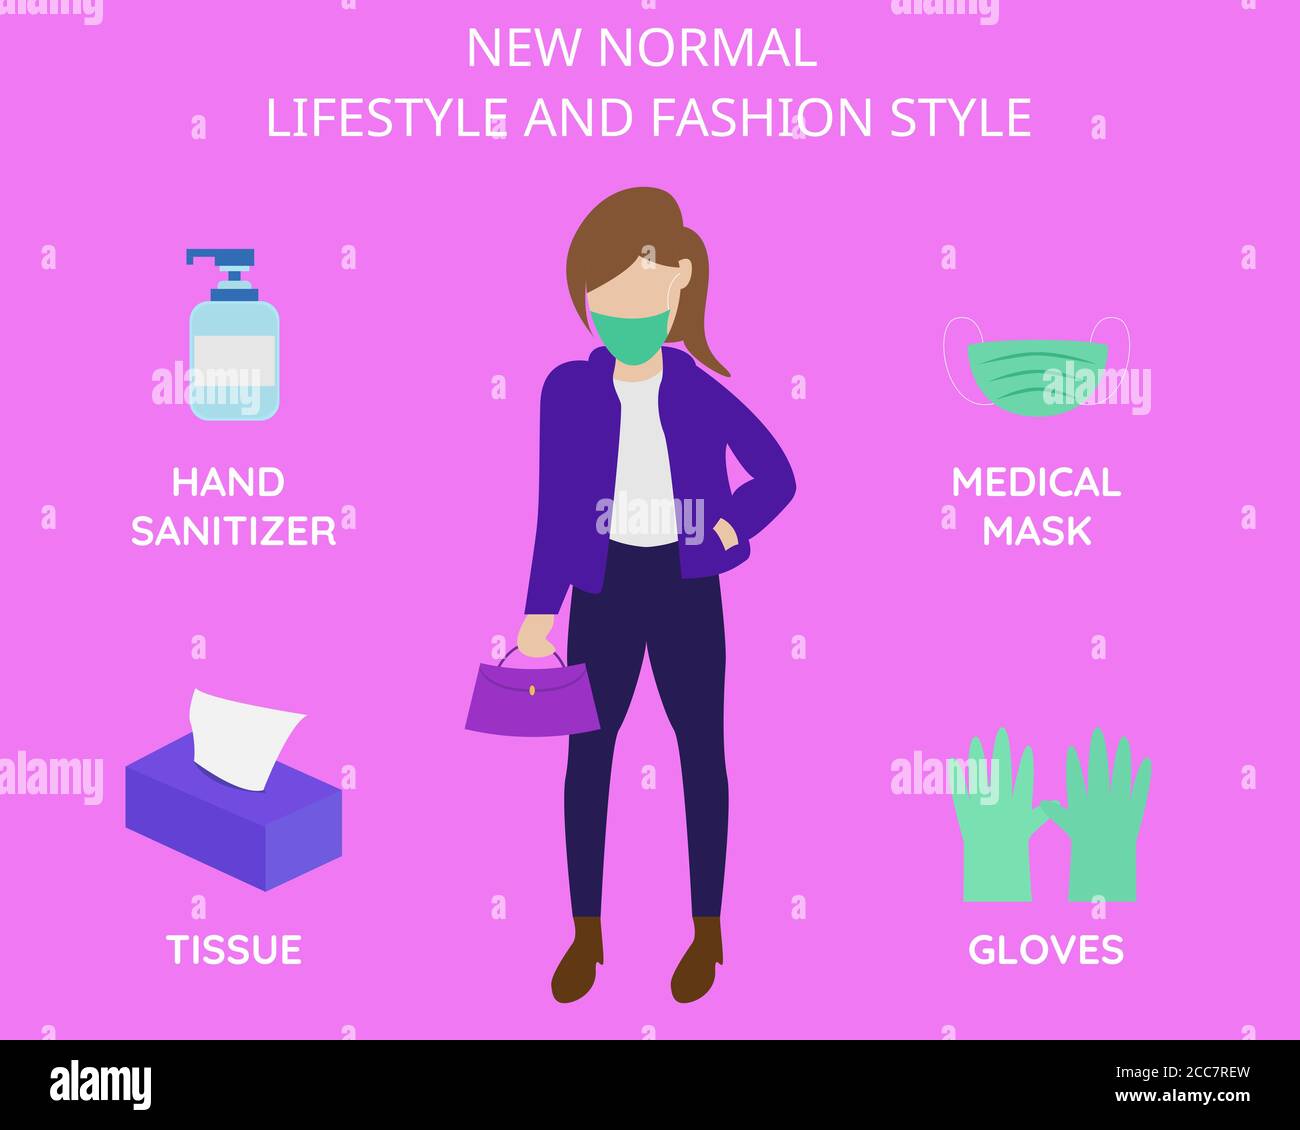 Illustration vector design of lifestyle and fashion style on new normal activities. Bringing all things such as hand sanitizer, tissue, medical mask a Stock Vector